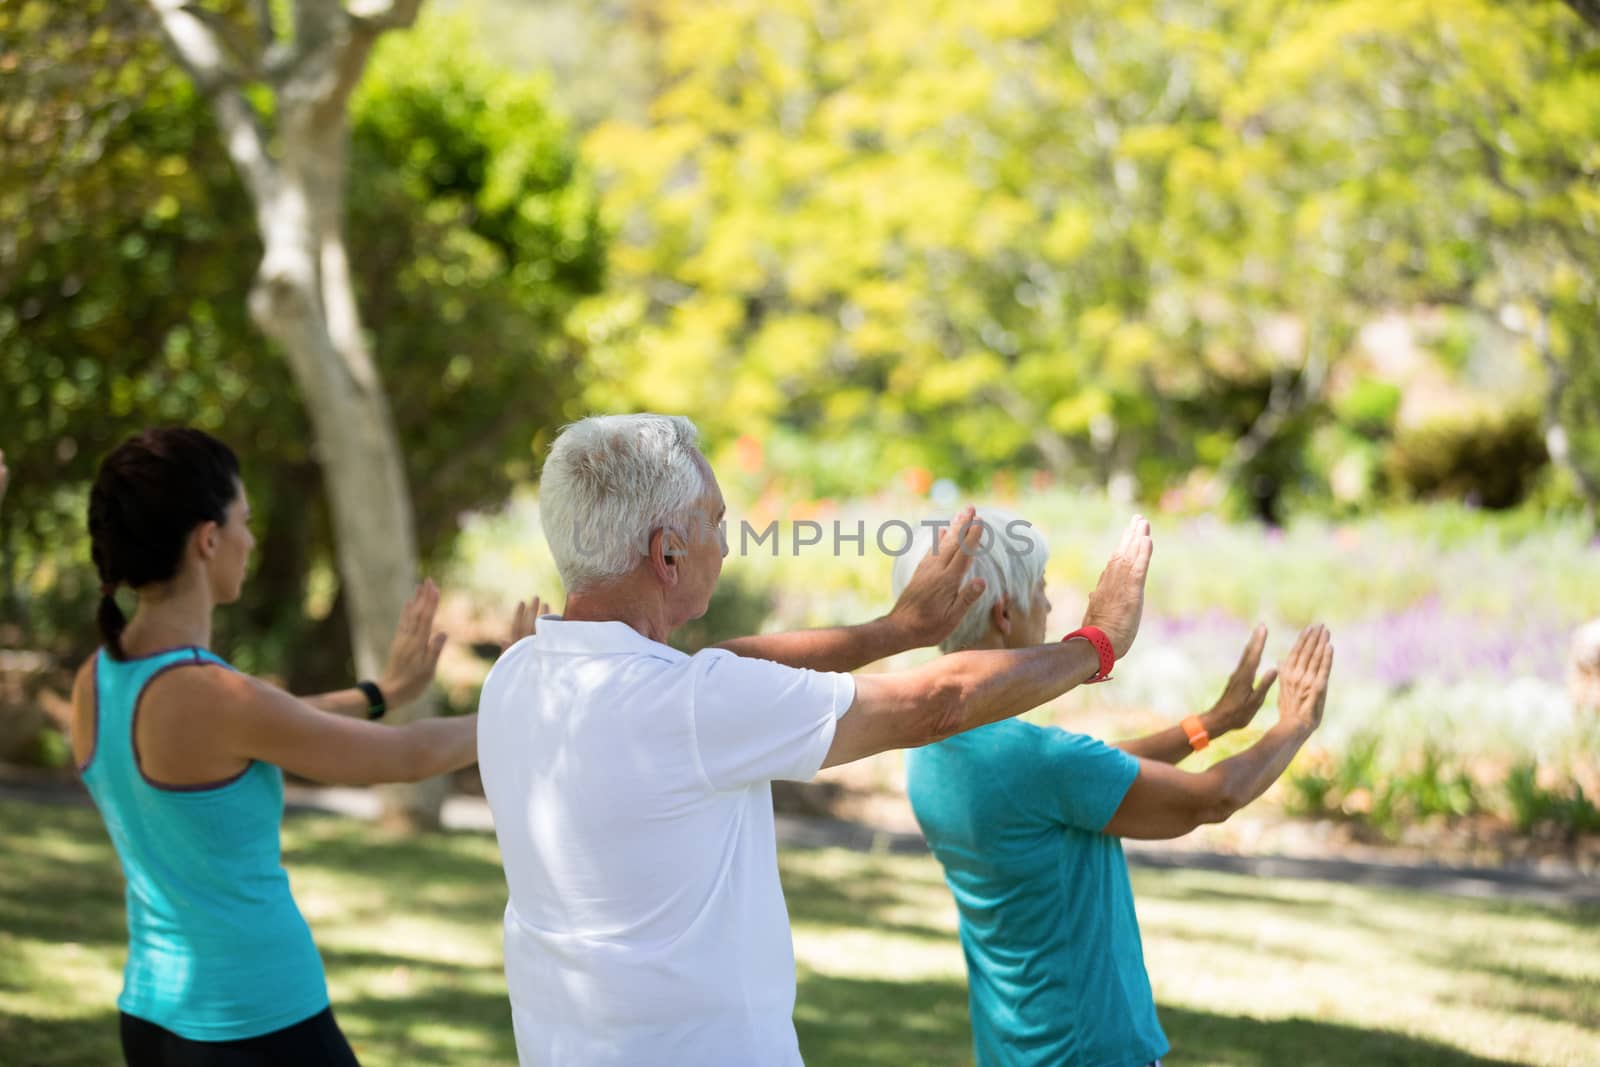 Group of people exercising in the park by Wavebreakmedia